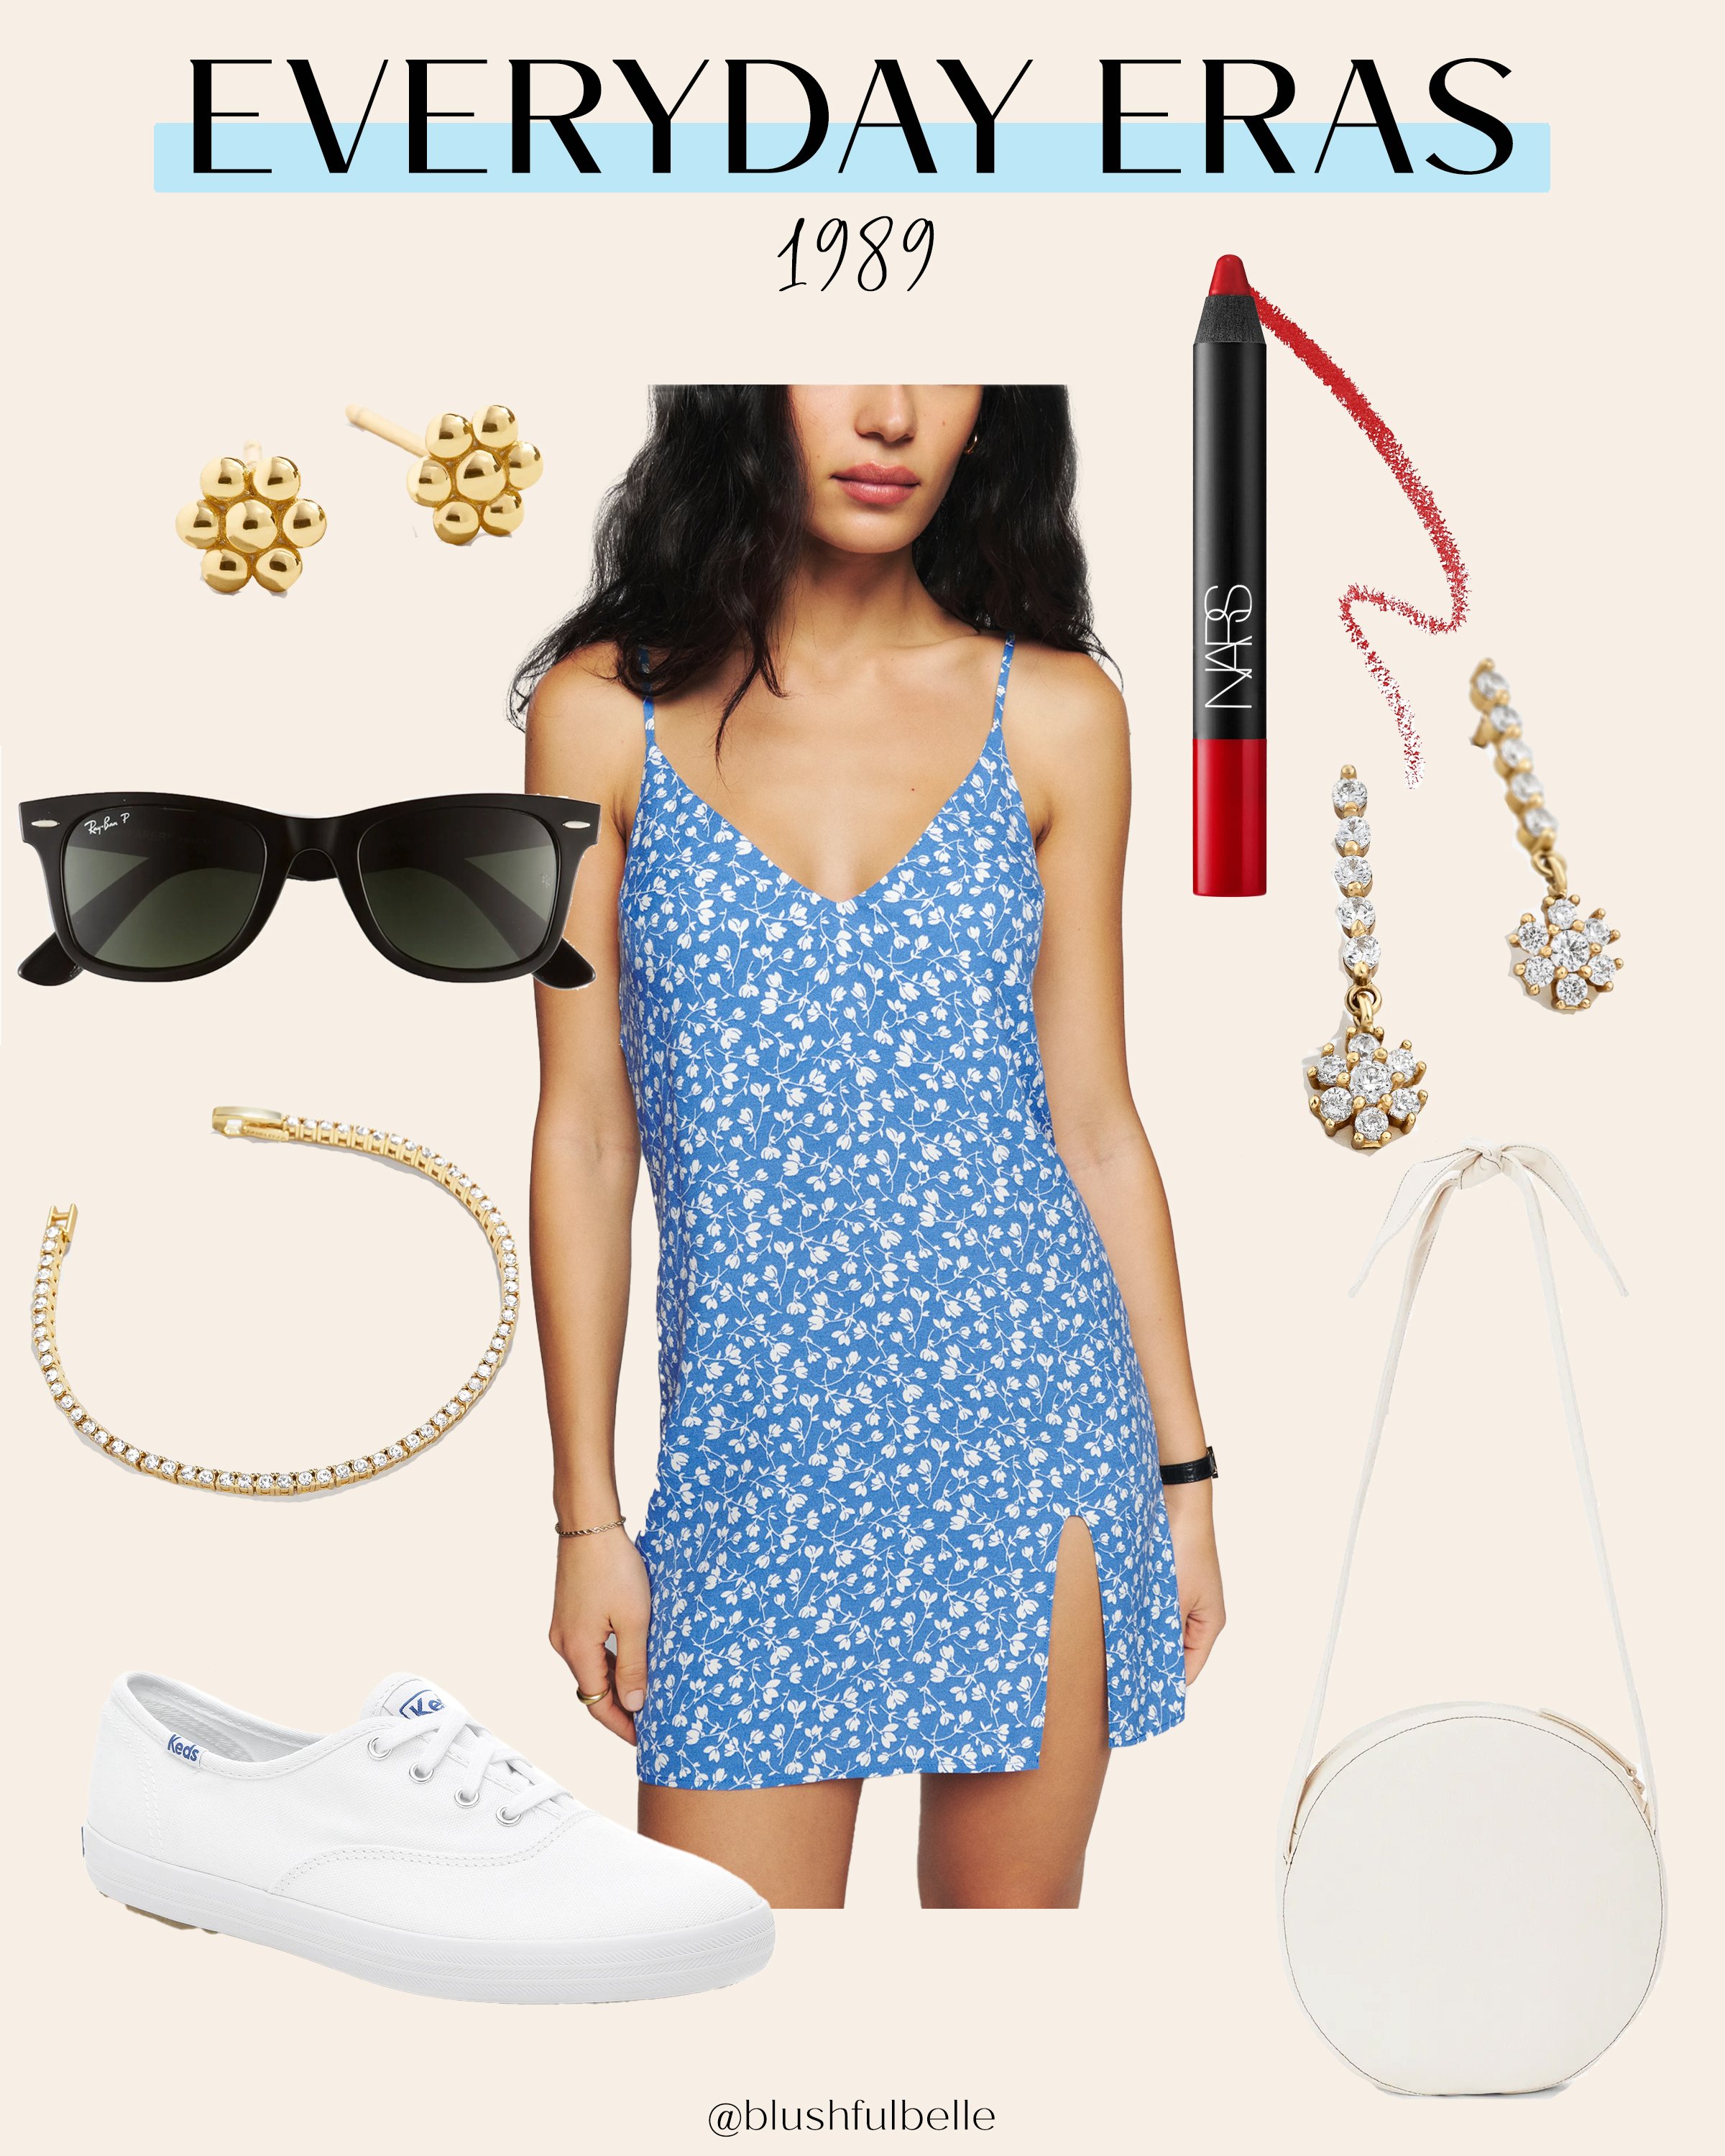 Flawless: TaylorSwiftsLegs  Louis vuitton outfit ideas, Louis vuitton  dress, Taylor swift pictures